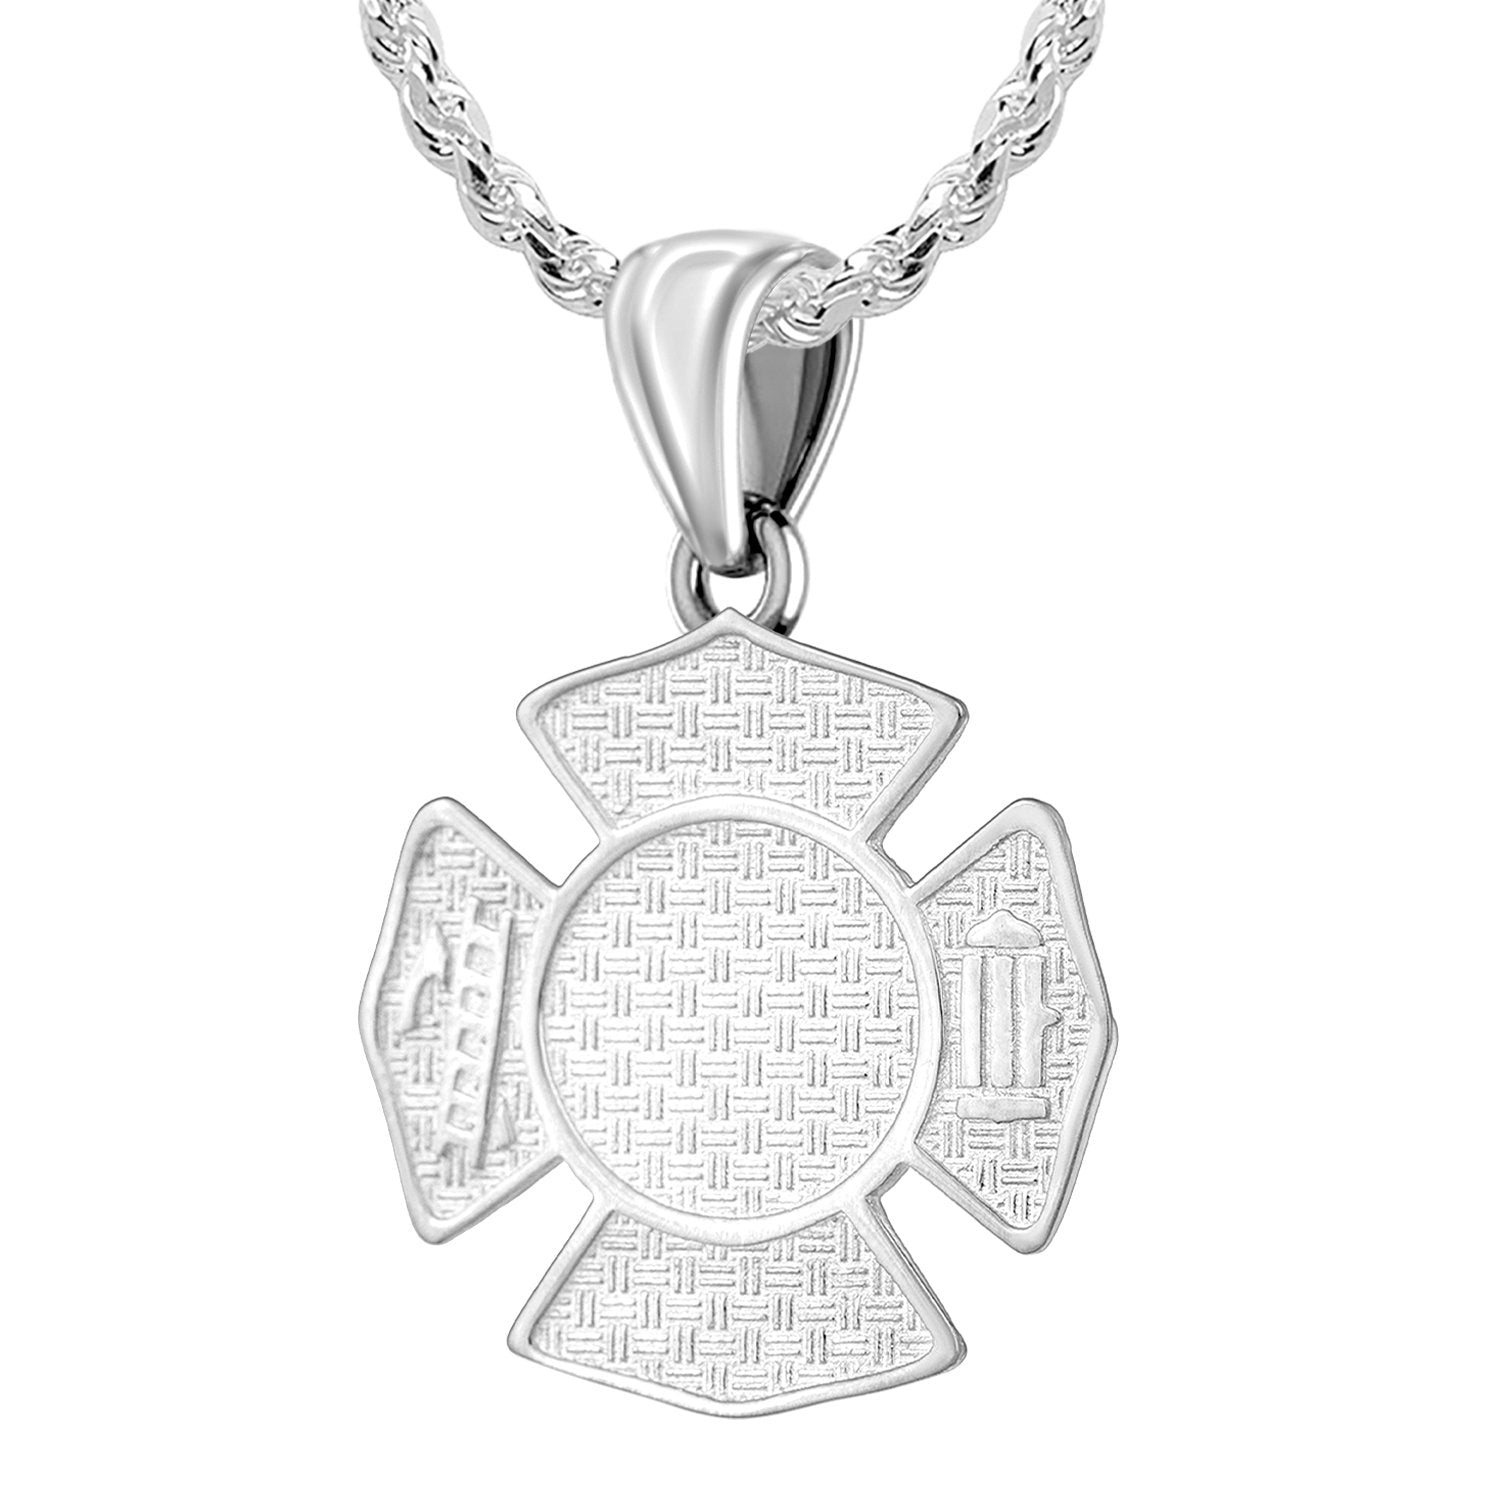 Firefighter Pendant of 26mm Length - 1.5mm Rope Chain